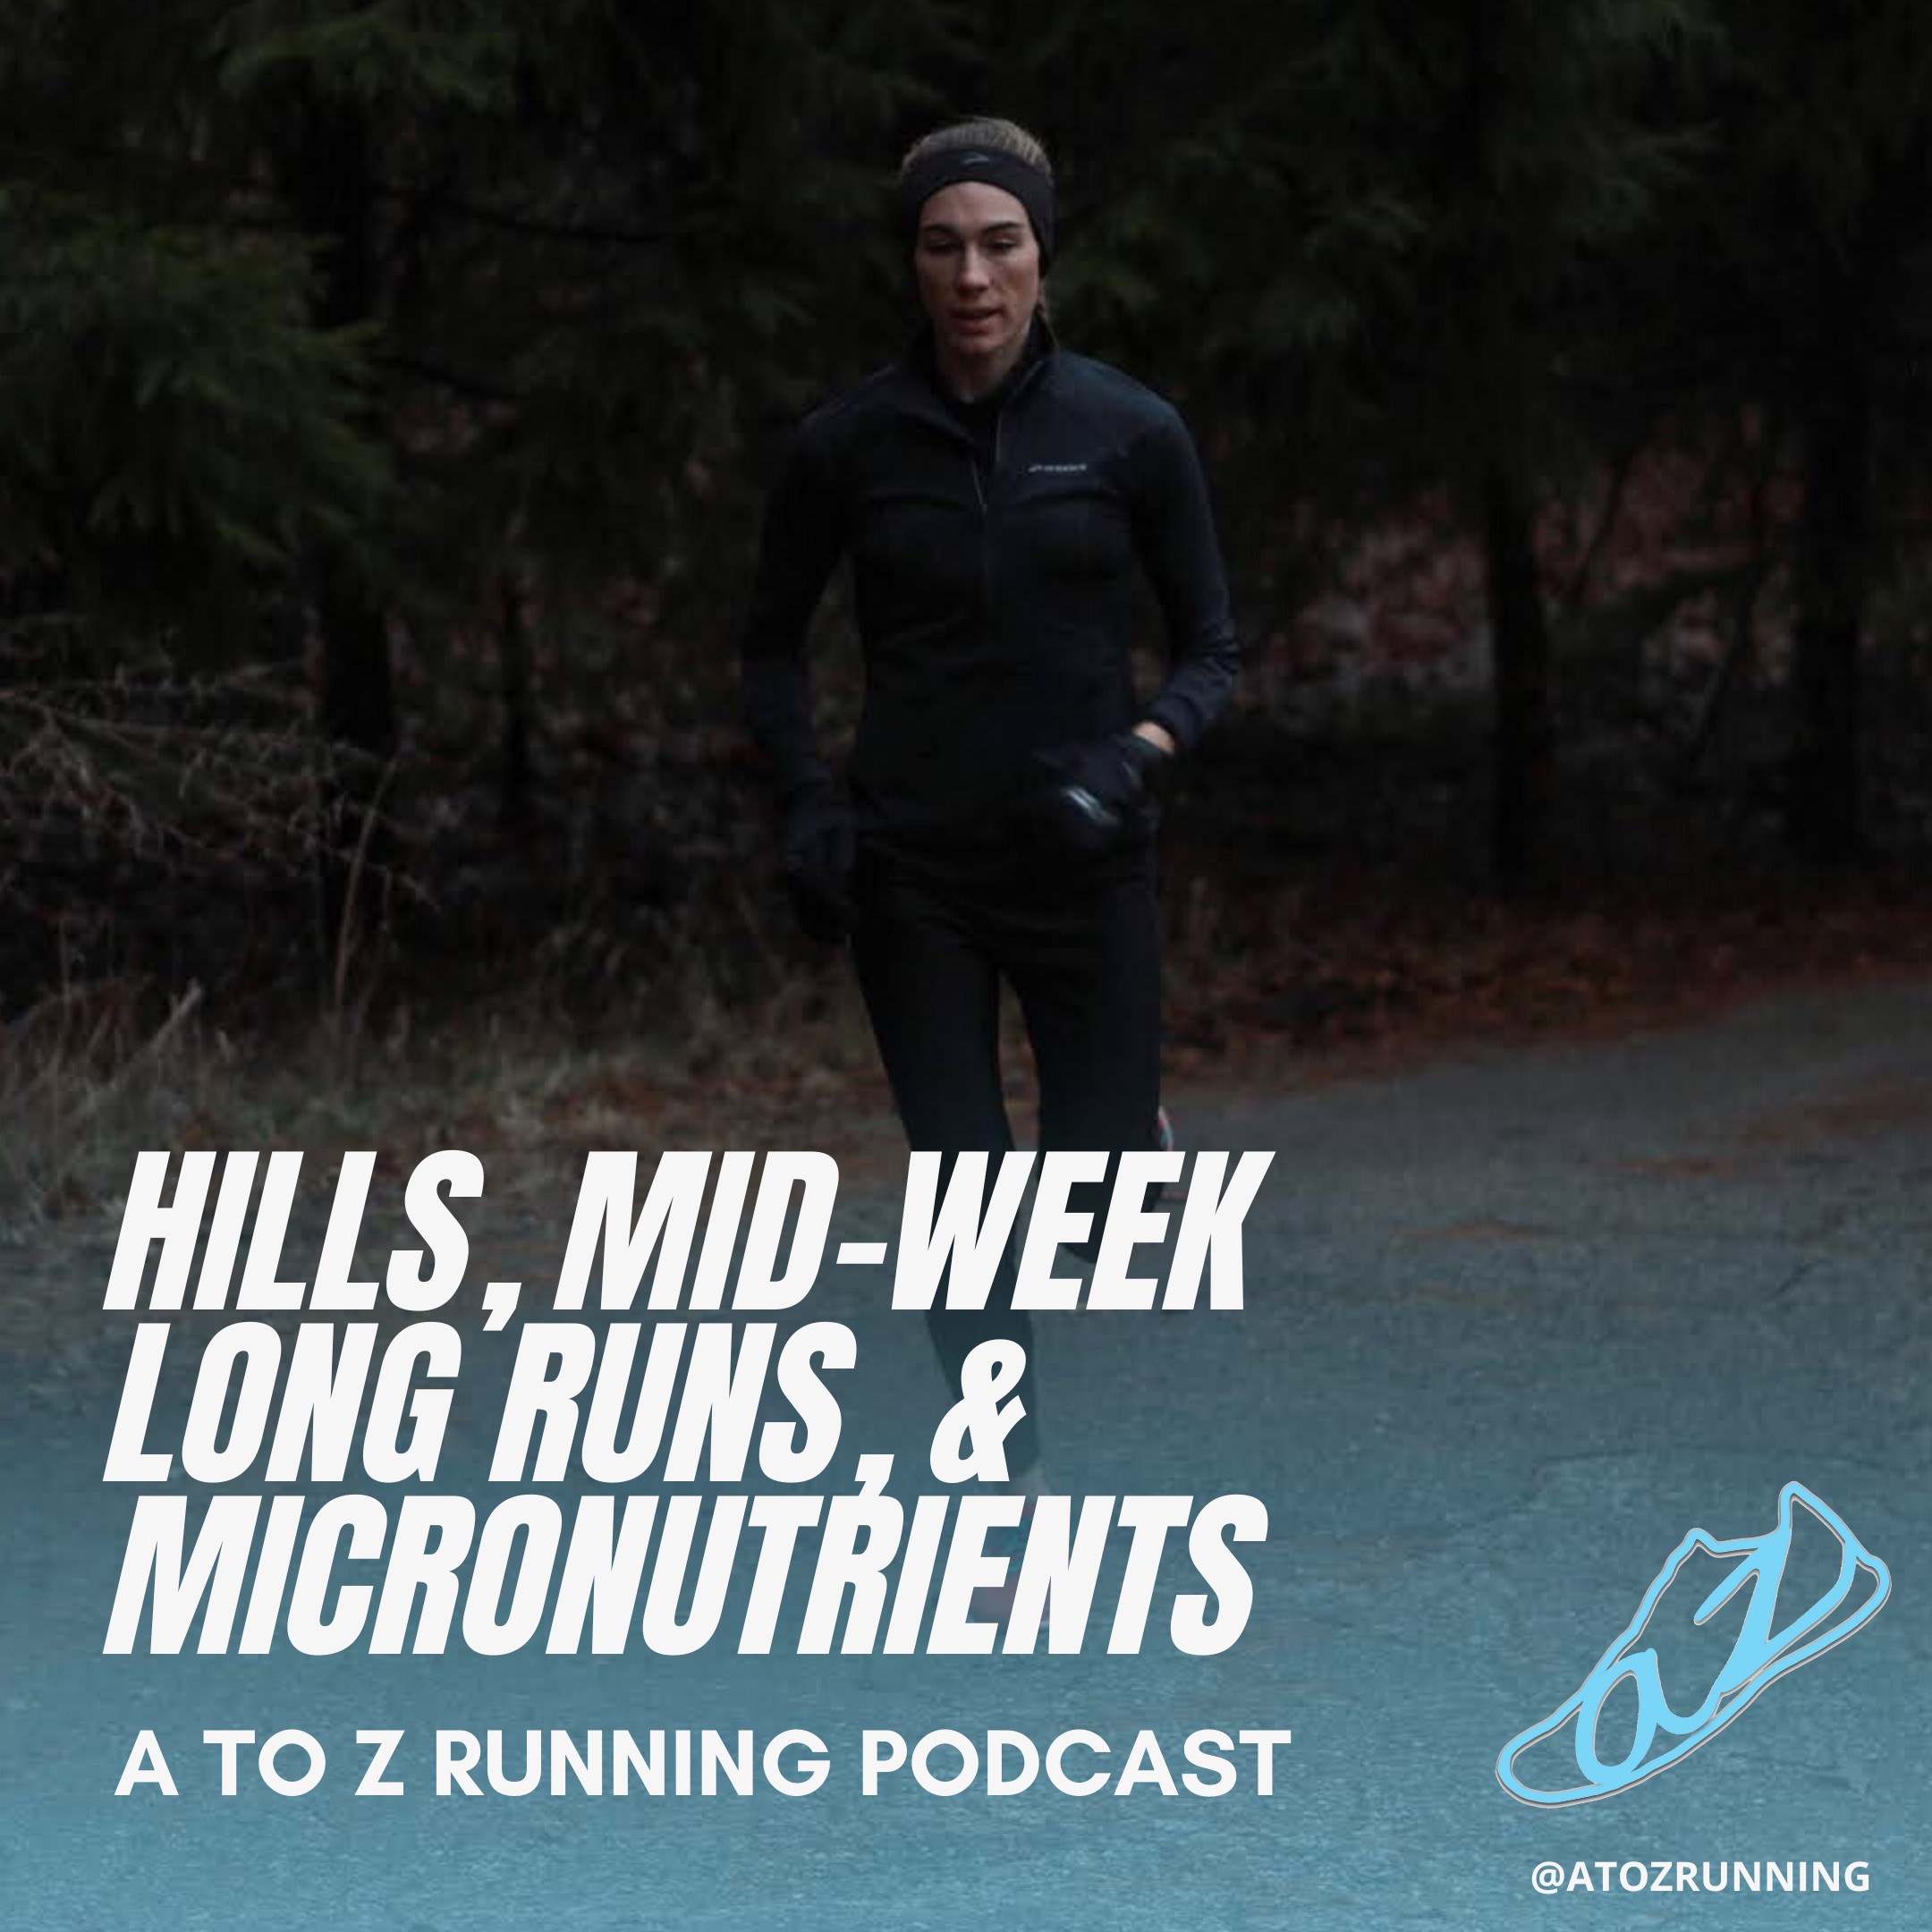 hills midweek long runs and micronutrients